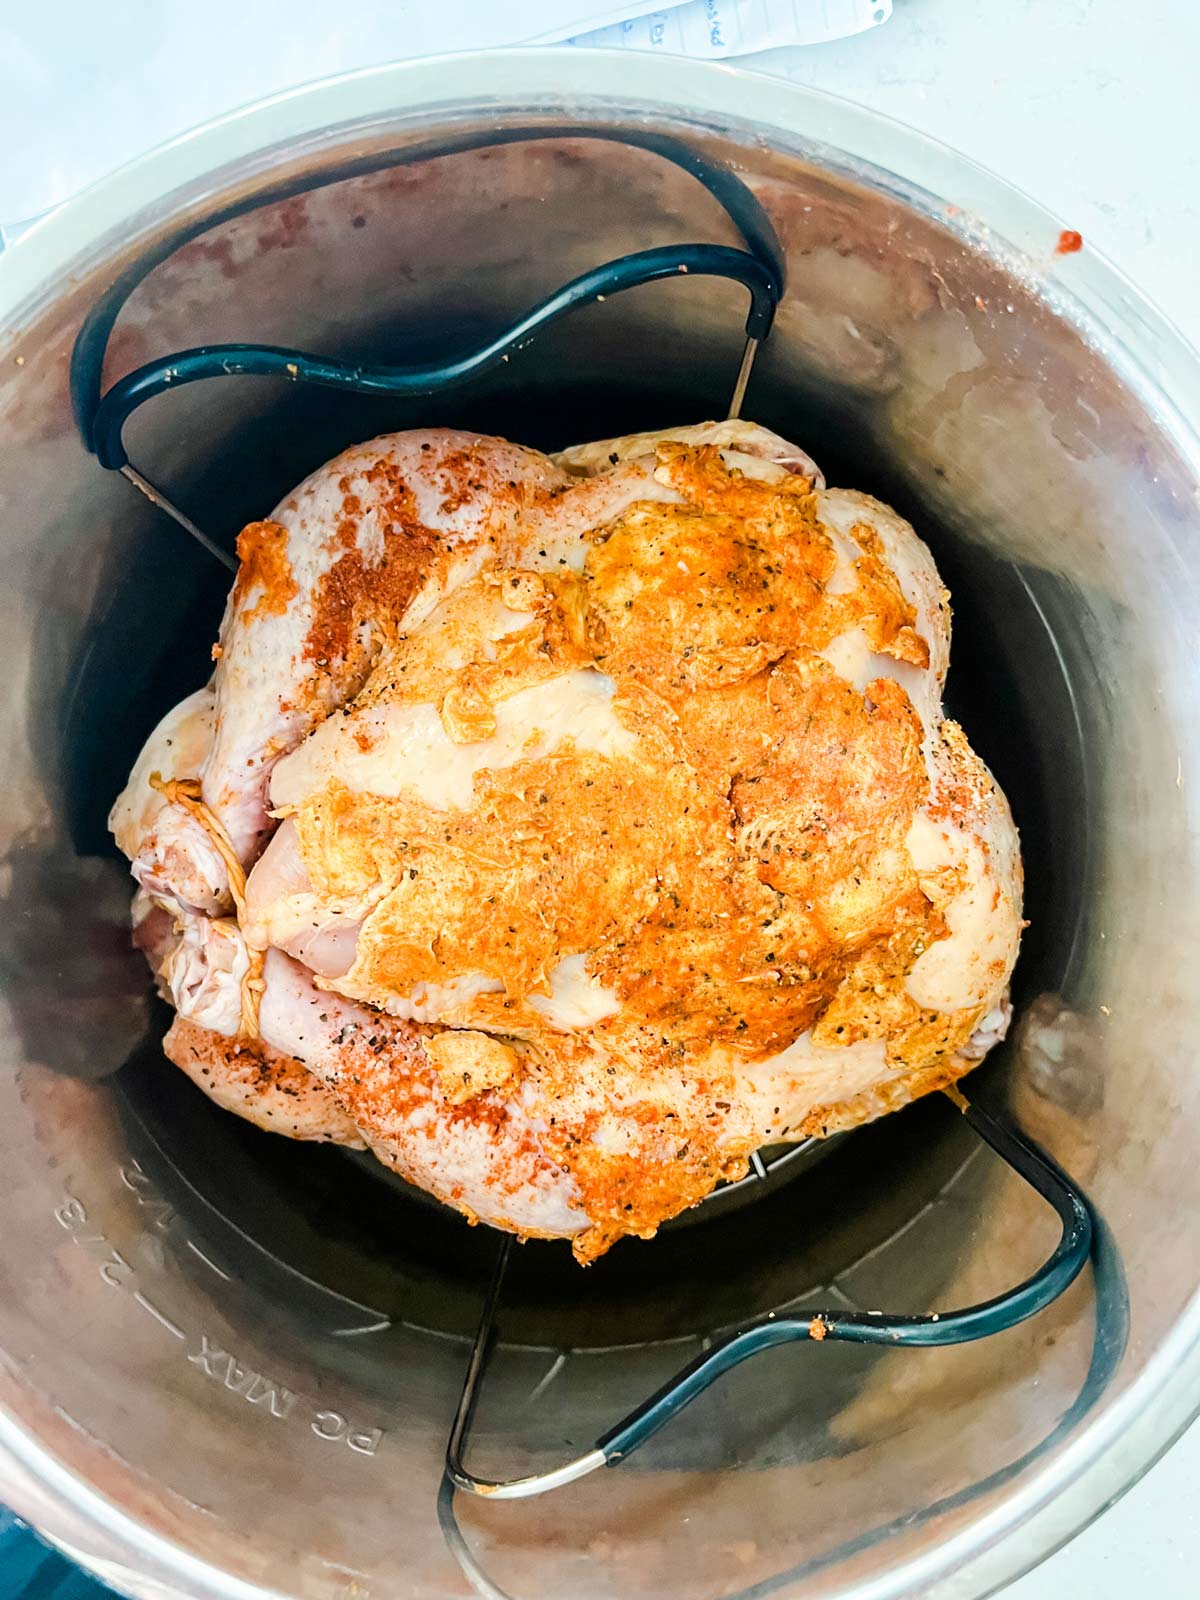 A buttered and seasoned chicken ready to cook in an Instant Pot.